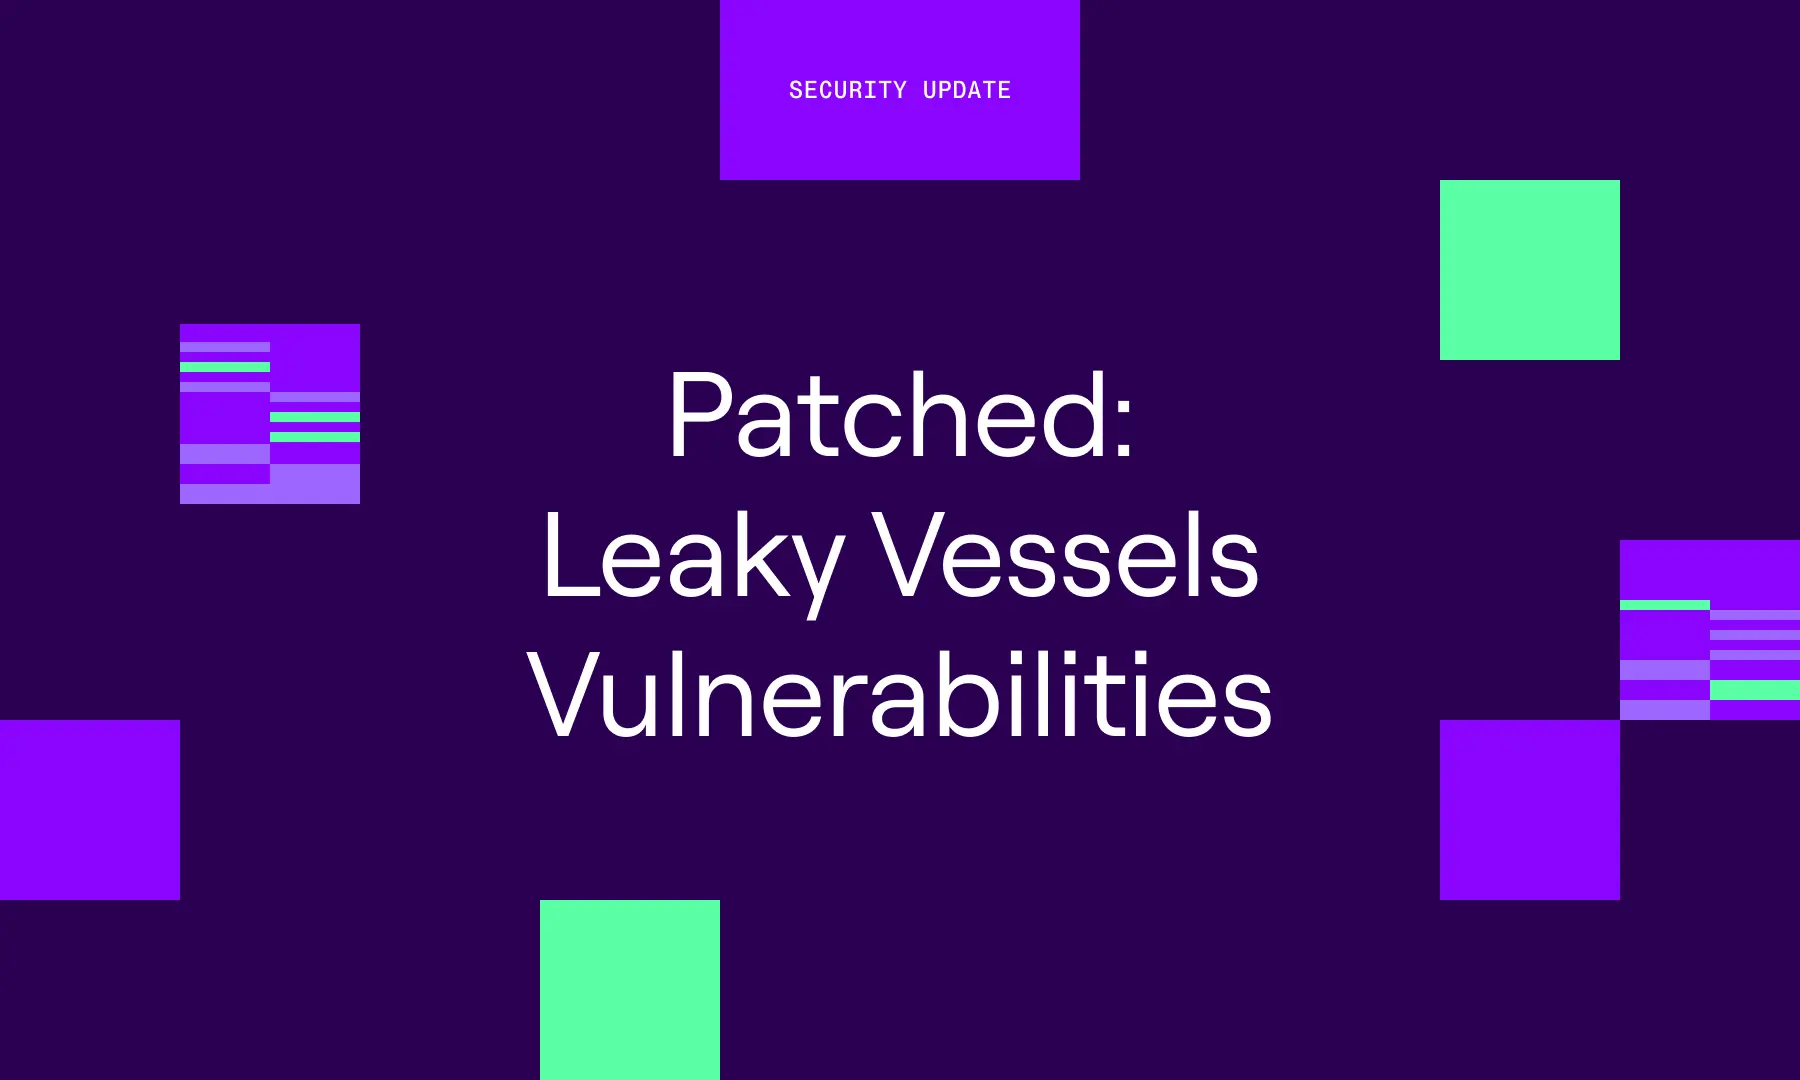 Our Response to the Leaky Vessels Container Breakout Vulnerabilities